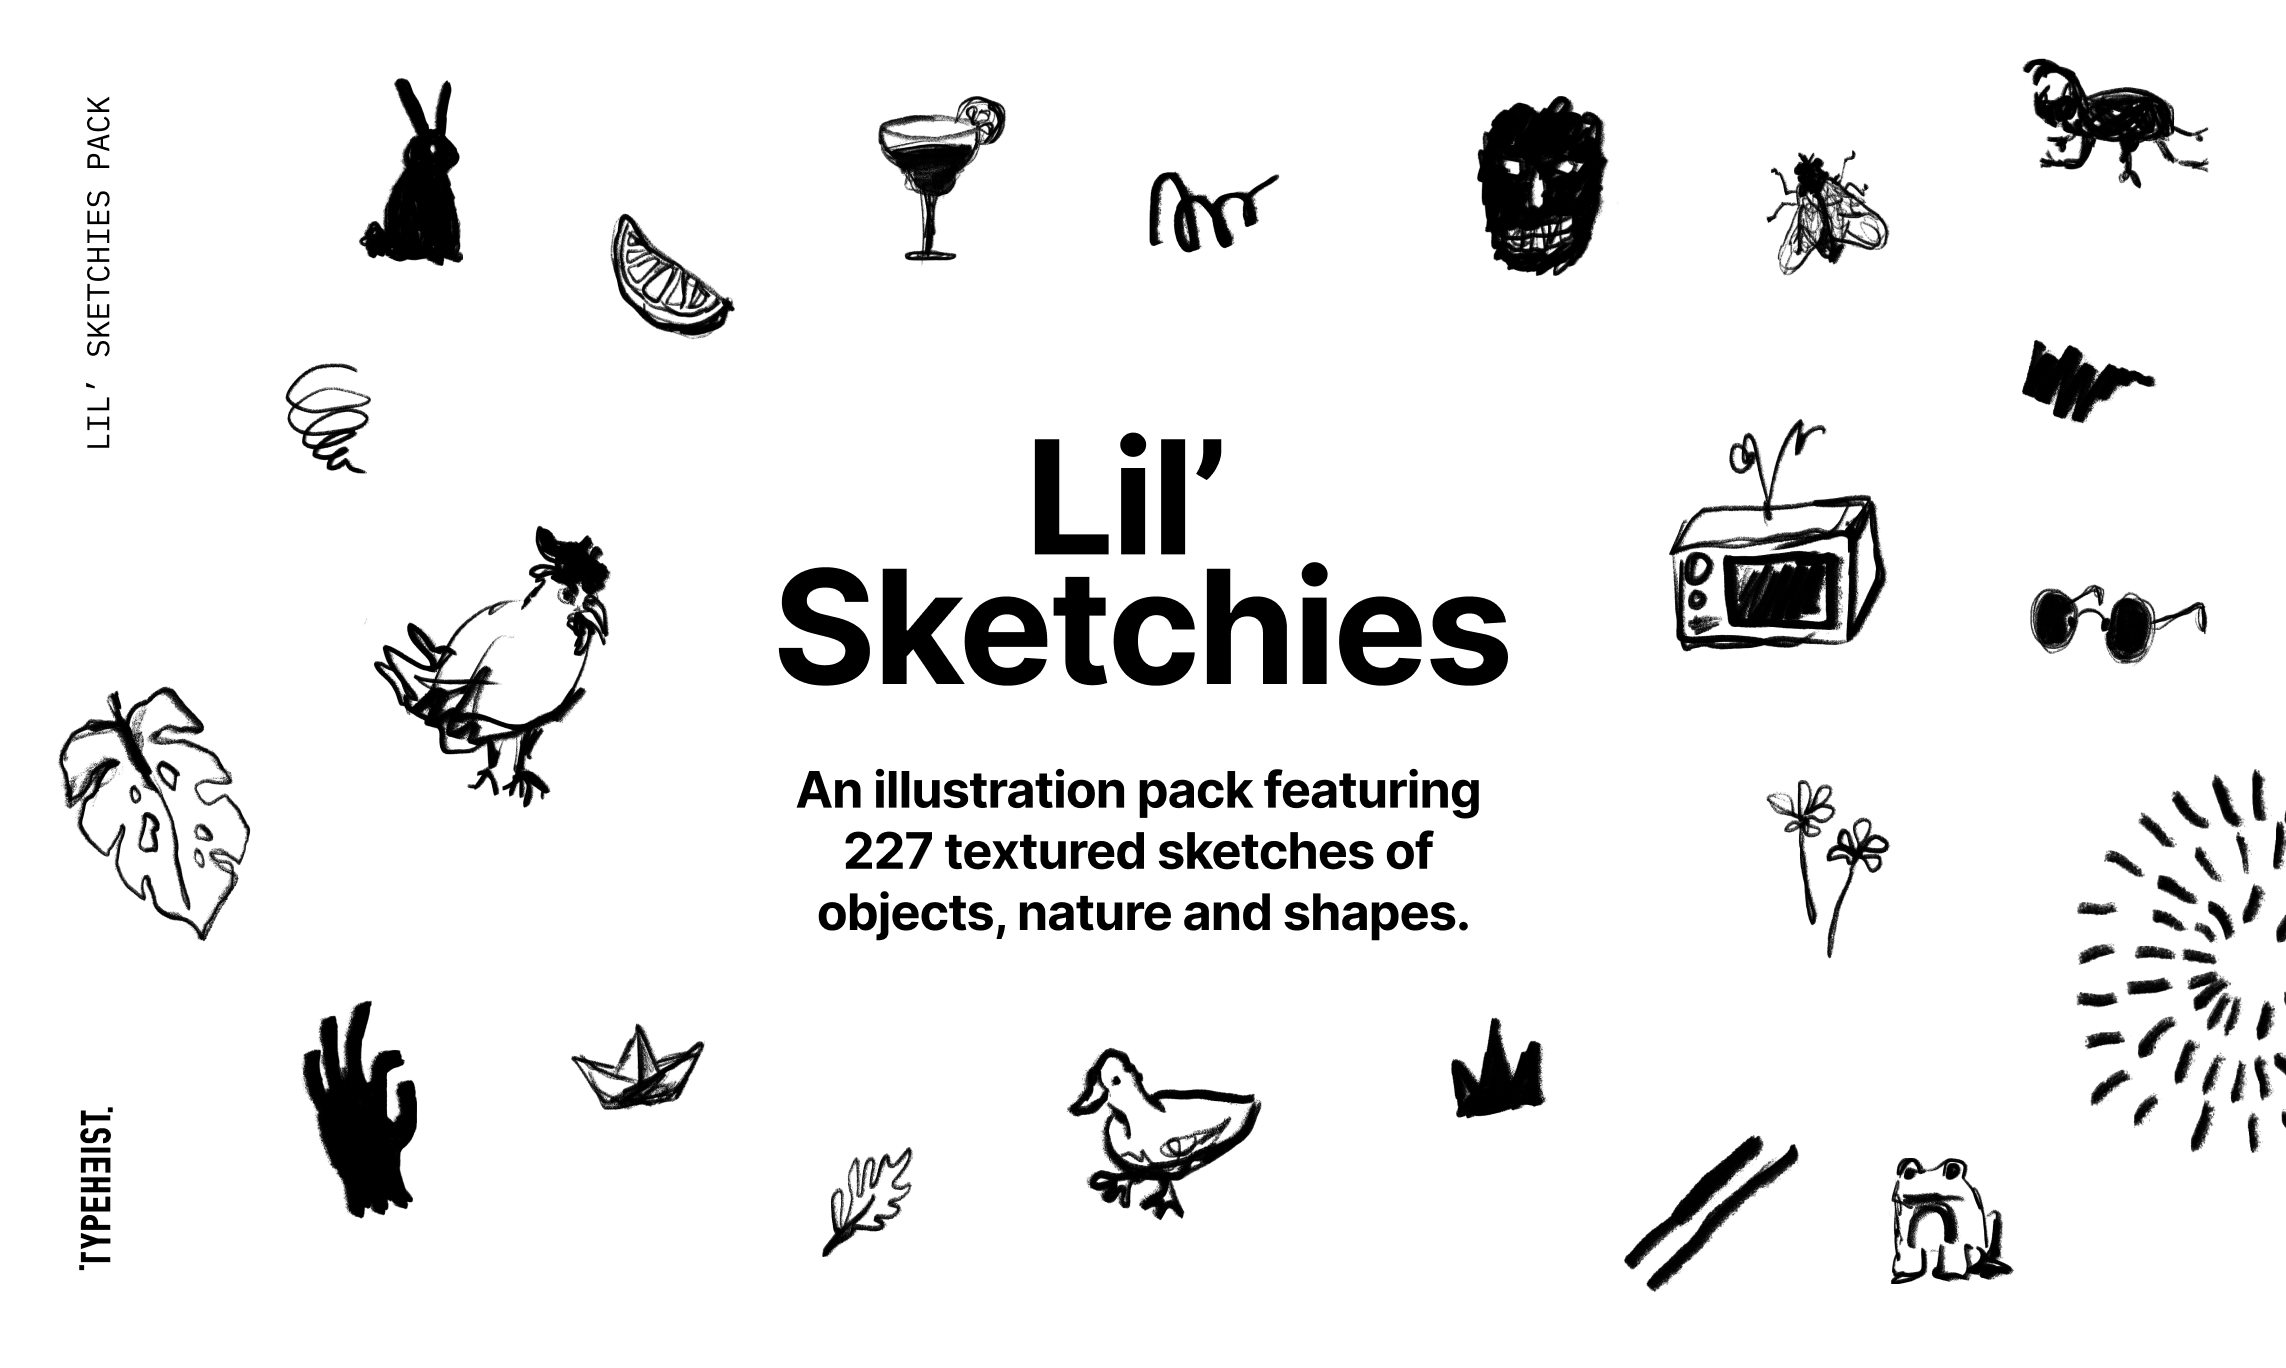 startuptile Lil’ Sketchies-227 textured sketches of objects nature shapes and social.